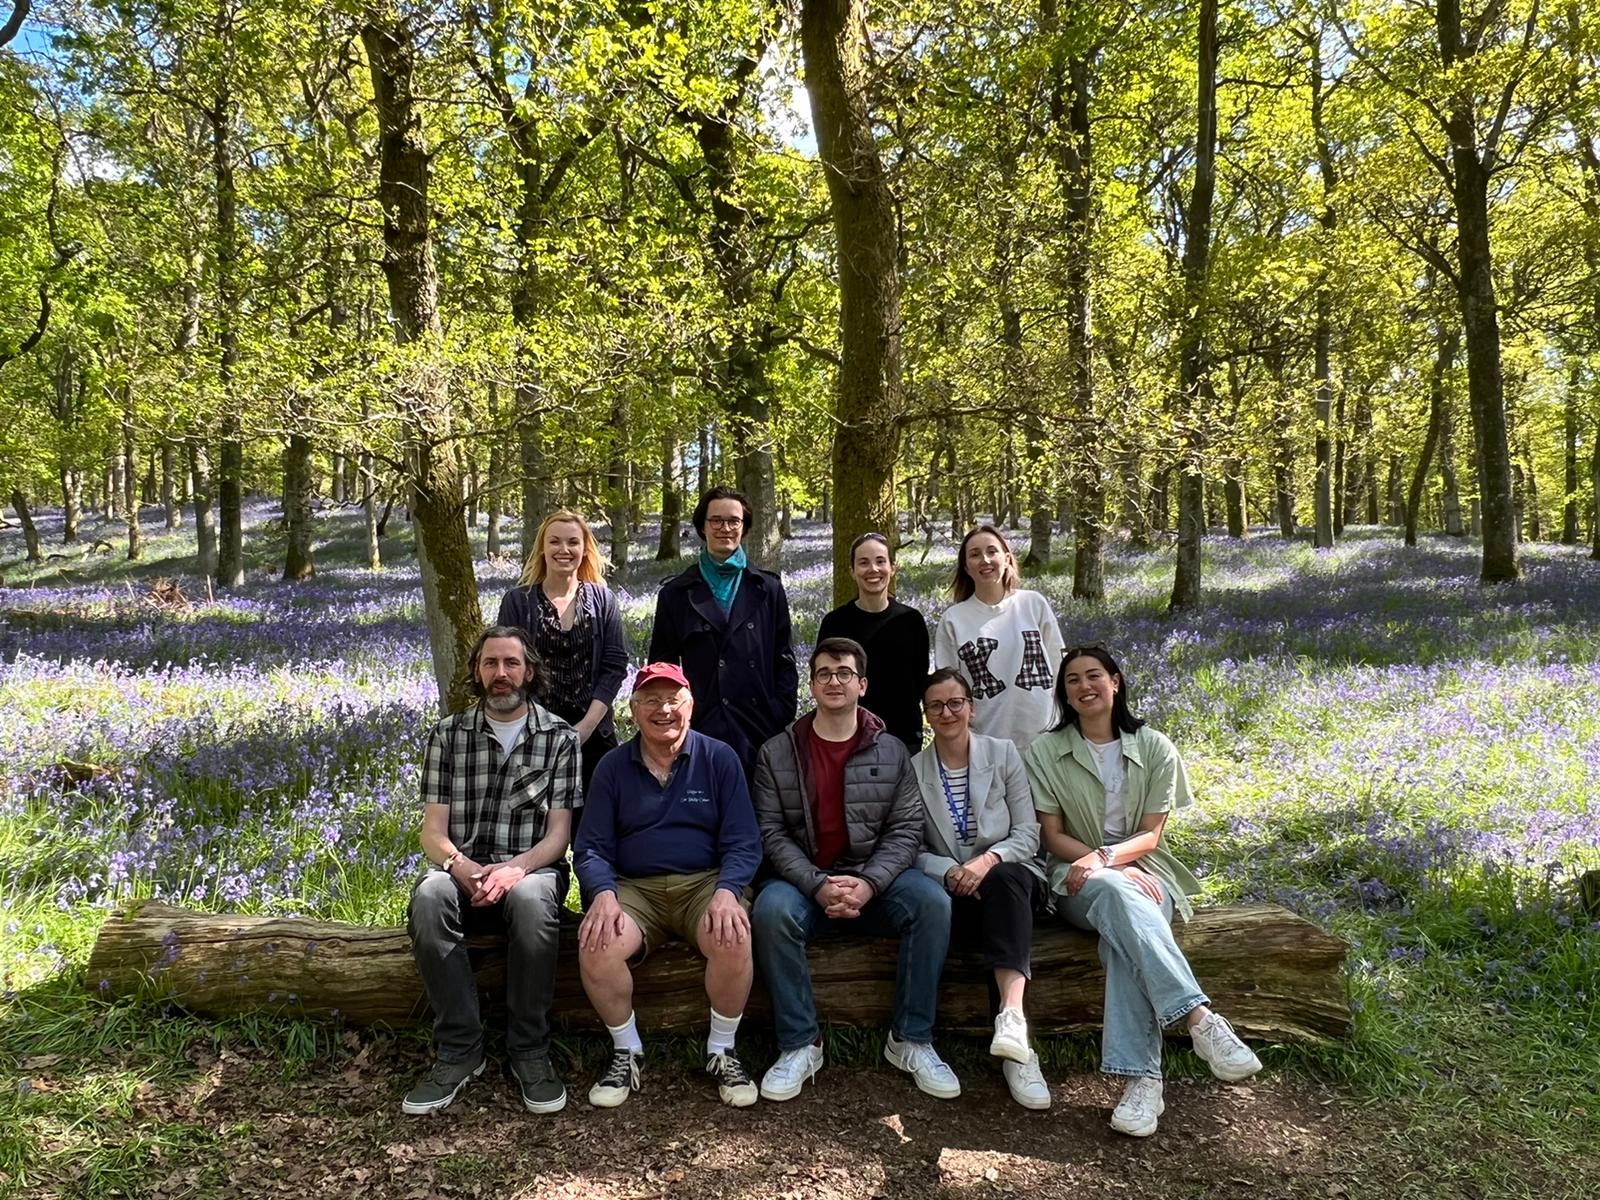 The Cohen lab pictured on May 19th 2022 during a walk at Kinclaven Woods, famed for its bluebells in Spring, following a lab retreat at the nearby Ballathie House Hotel about 20 miles north-west of lab. Back Row, Left to Right: Catriona Aitken, Paul Tammiste, Nicola Darling, Clara Figueras Vadillo; Front Row, Left to Right: Ian Kelsall, Philip Cohen, Tom Snelling, Tsvetana Petrova, Elisha McCrory